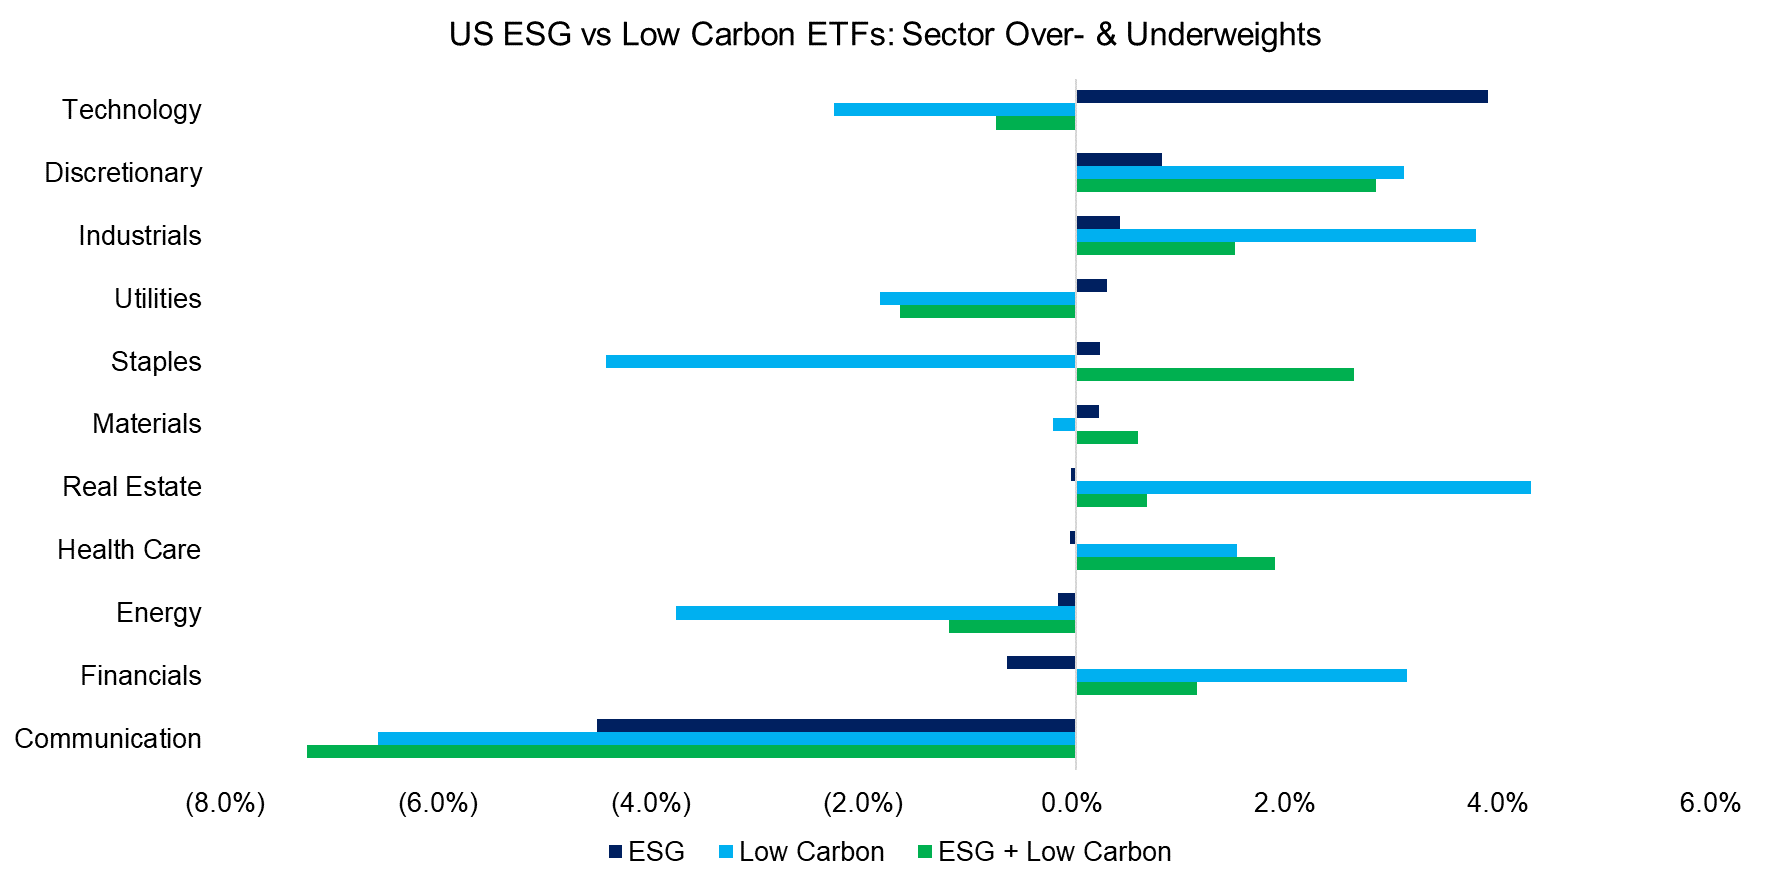 US ESG vs Low Carbon ETFs Sector Over- & Underweights